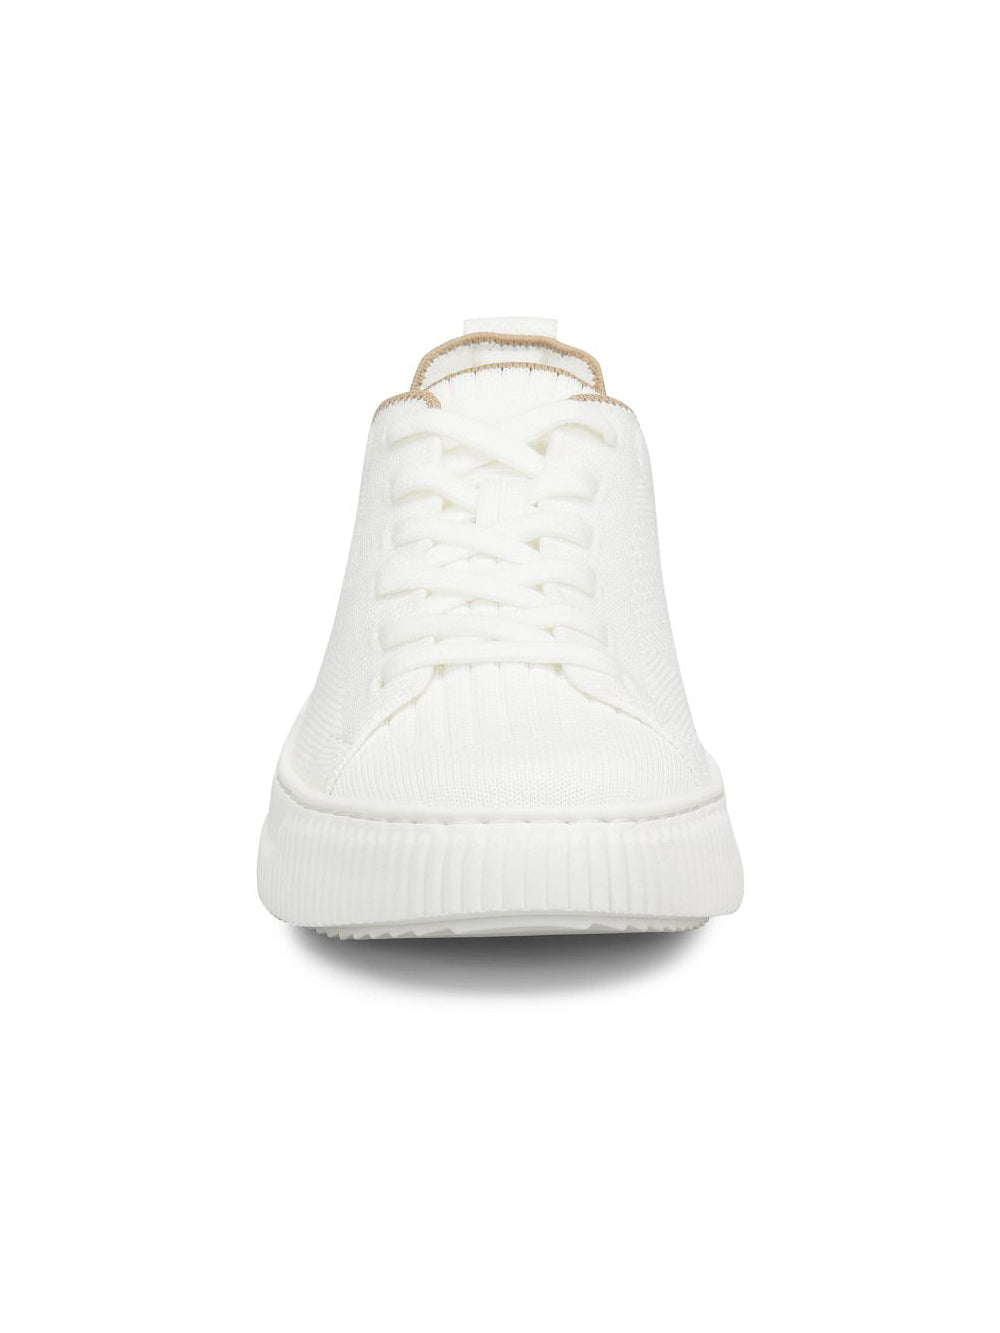 sofft shoes faro knit mesh sneaker in white